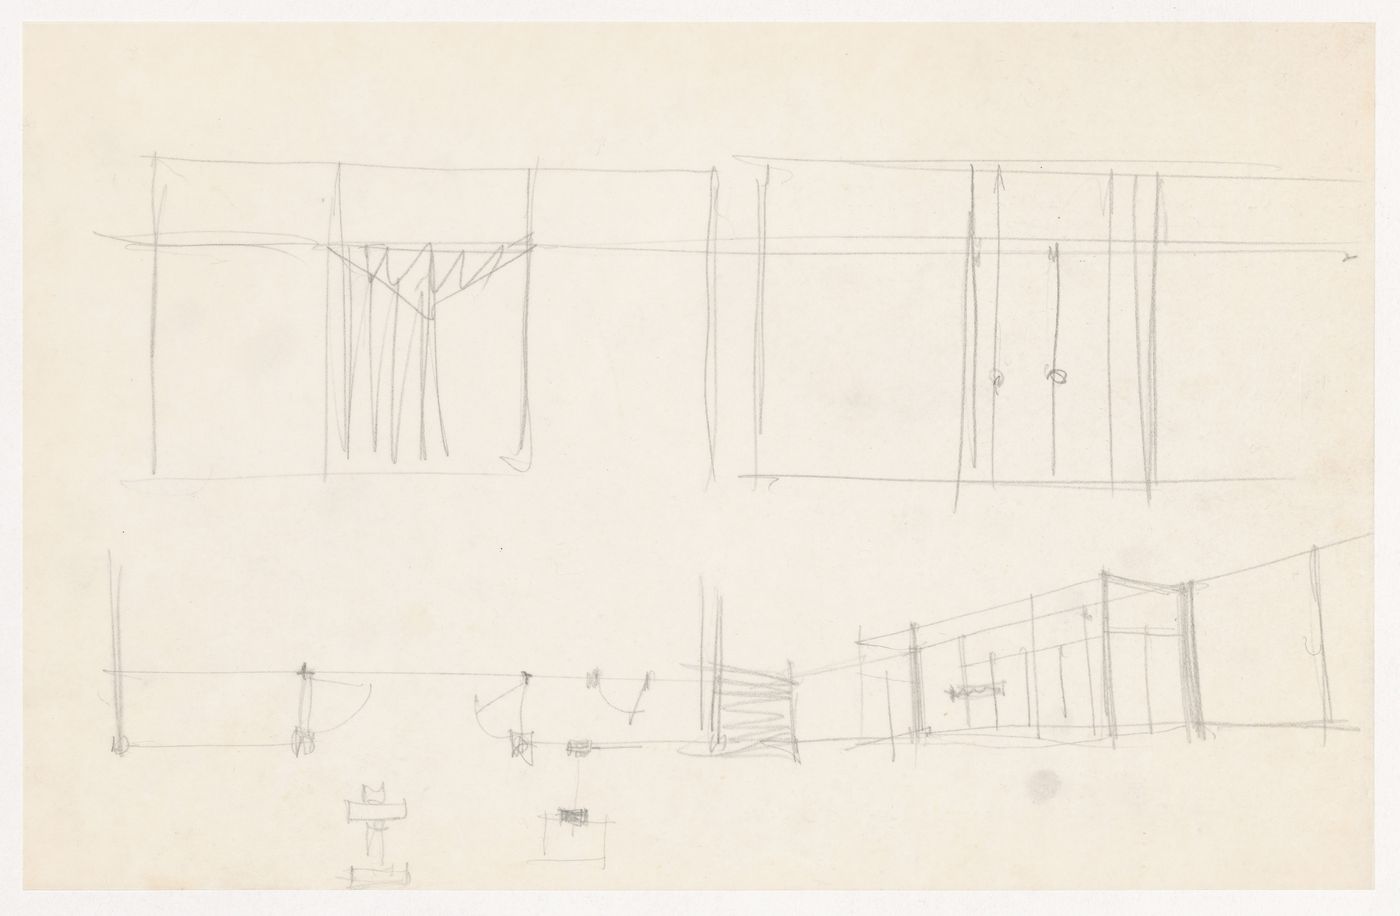 Sketch elevations, perspective sketch, sketch plan and sketch sectional details for entrance for the Metallurgy Building, Illinois Institute of Technology, Chicago